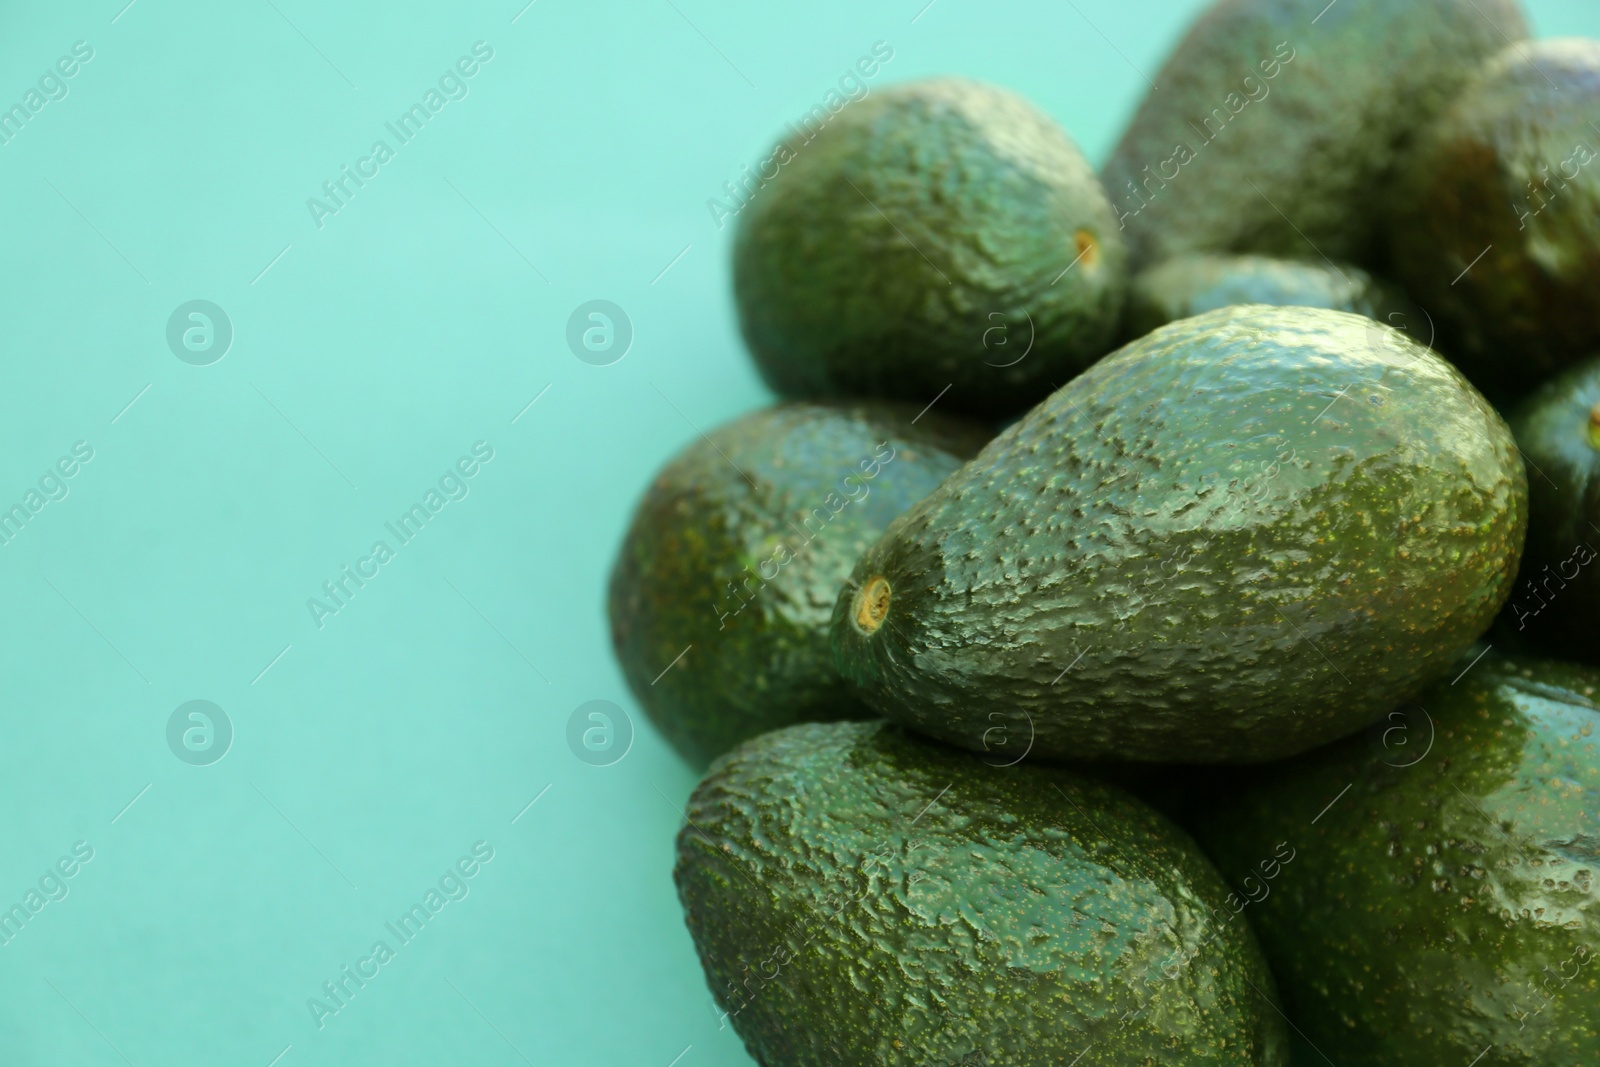 Photo of Many tasty ripe avocados on turquoise background. Space for text